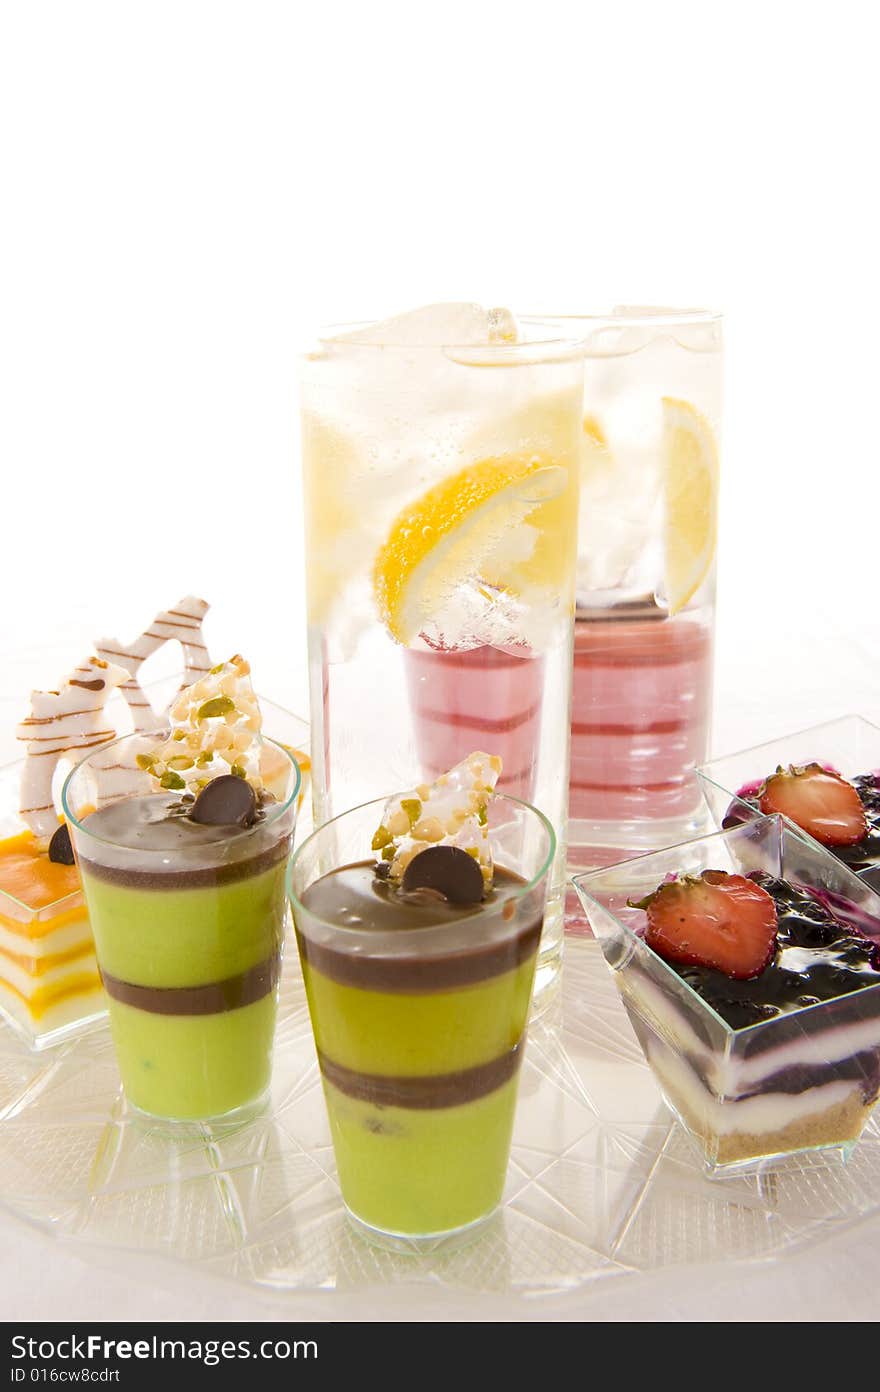 Glasses with sparkling water containing fresh lemon slices, surrounded by colorful confectionery on a white background. Glasses with sparkling water containing fresh lemon slices, surrounded by colorful confectionery on a white background.